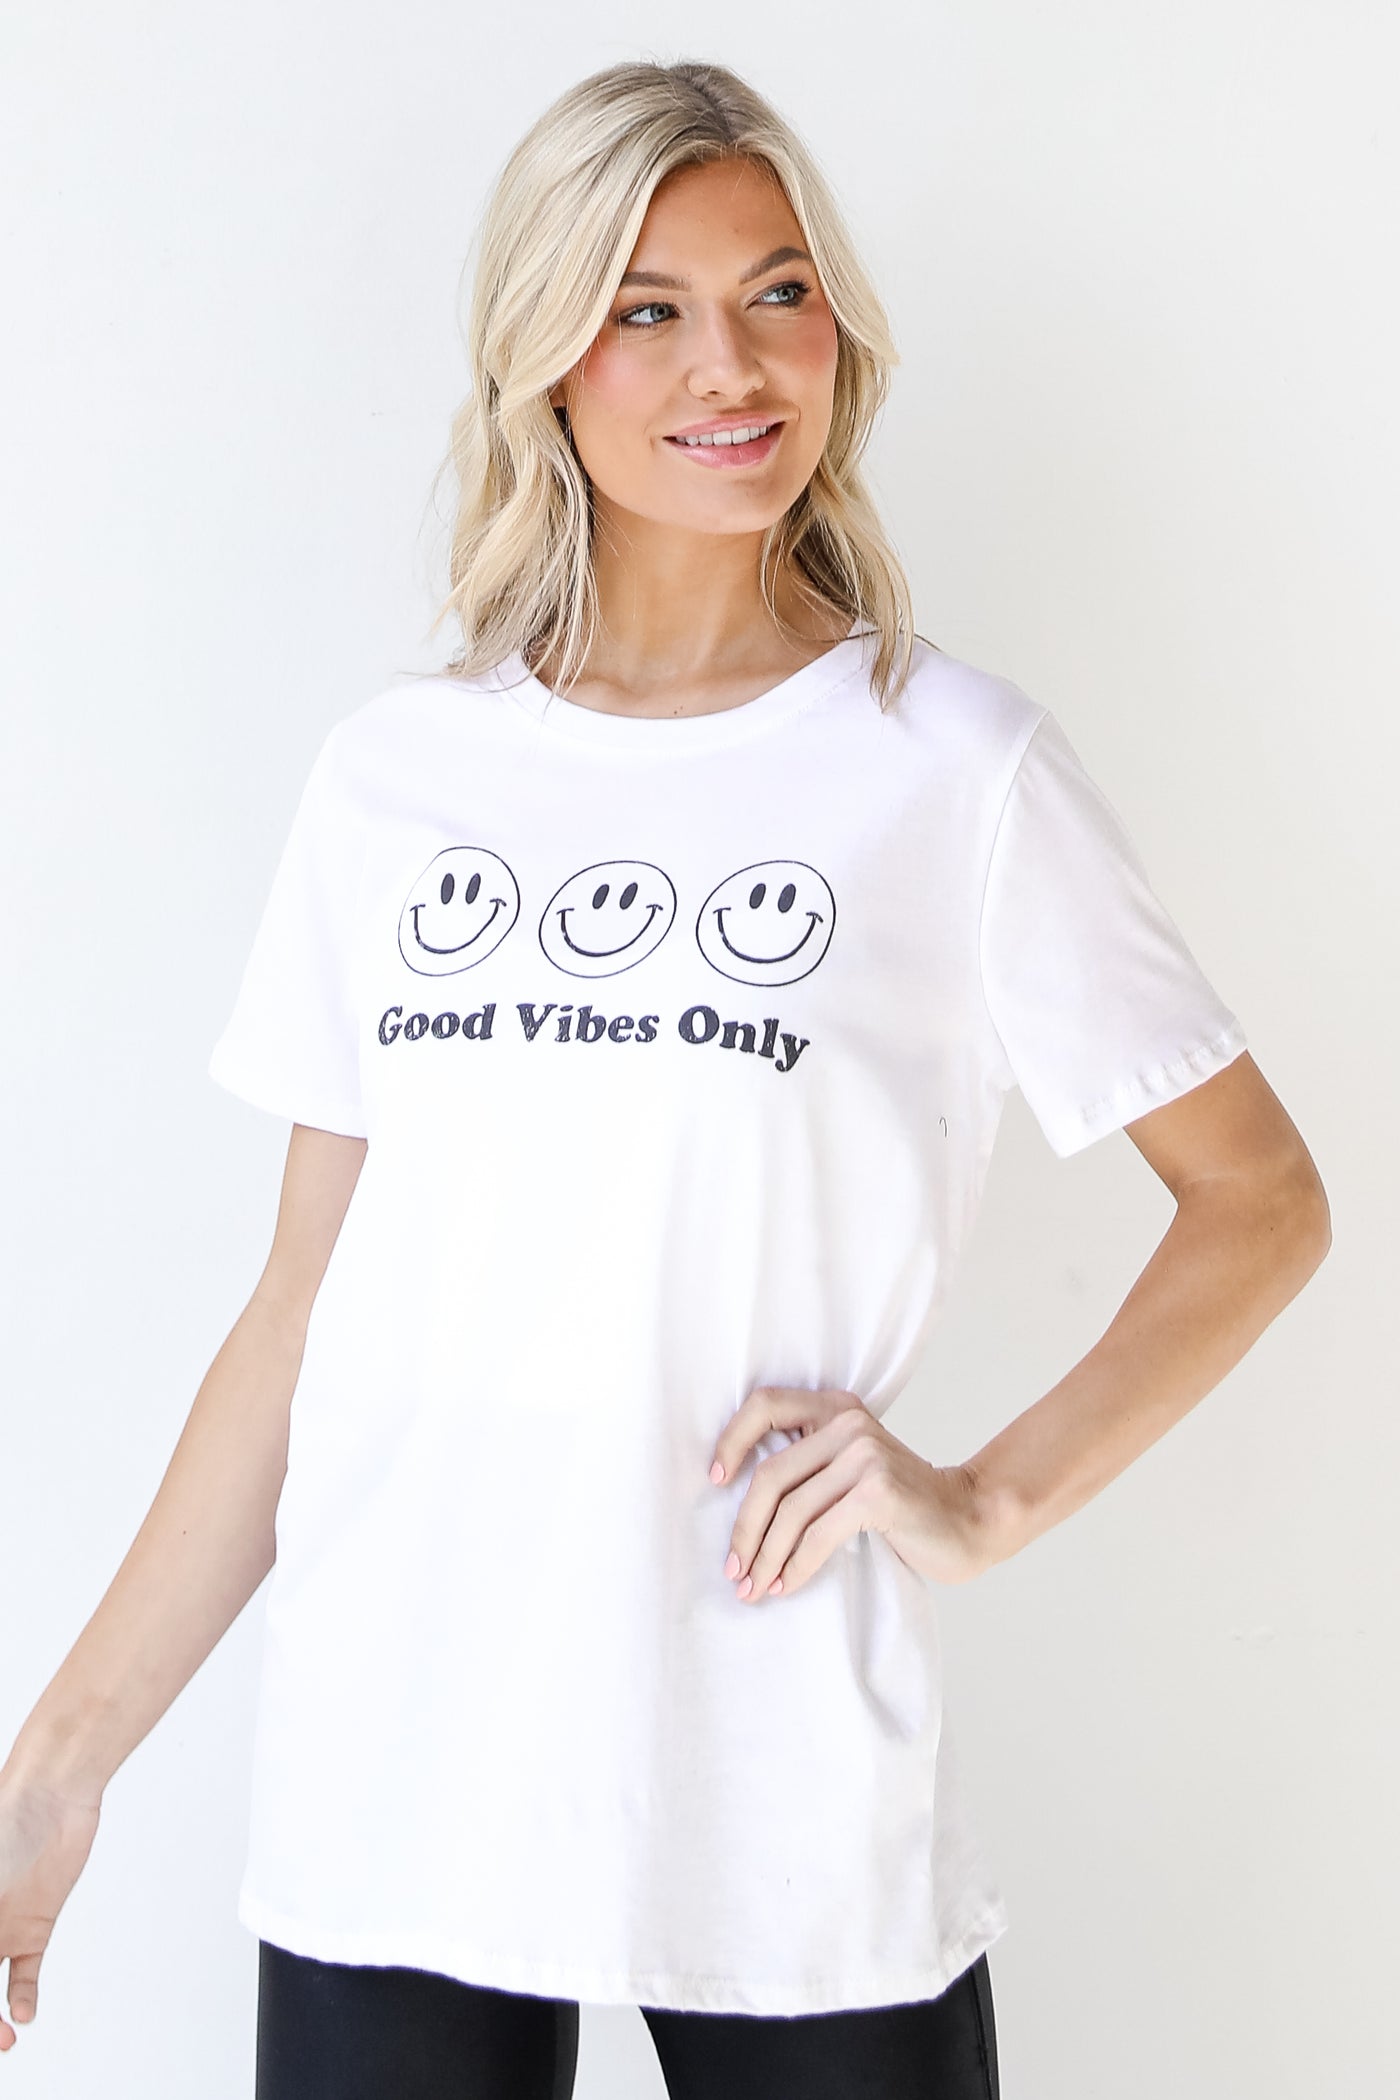 Good Vibes Only Smiley Graphic Tee from dress up